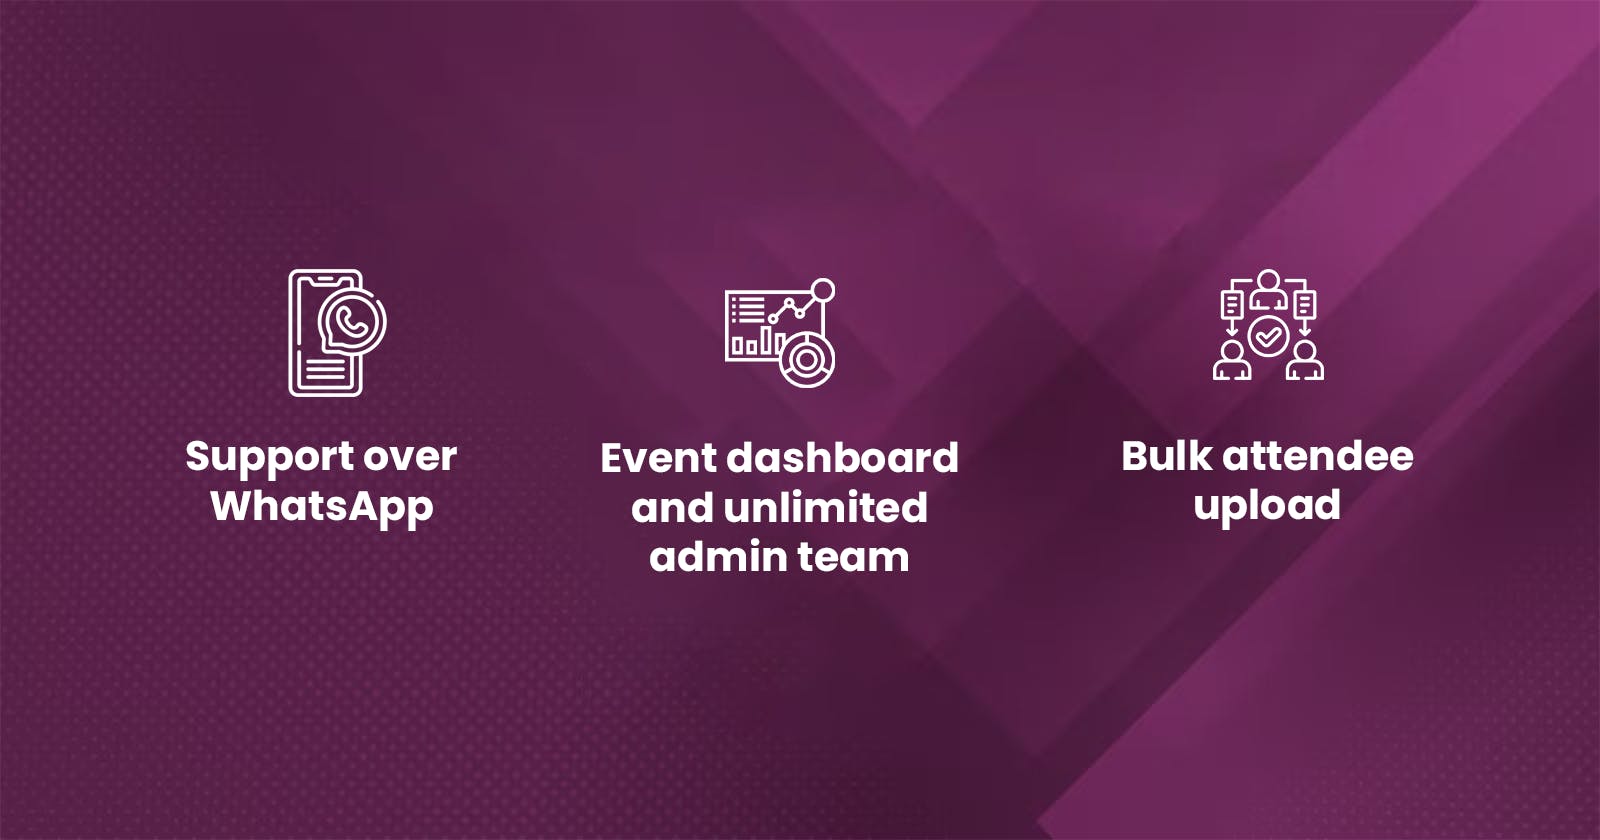 Additional standout features of KonfHub